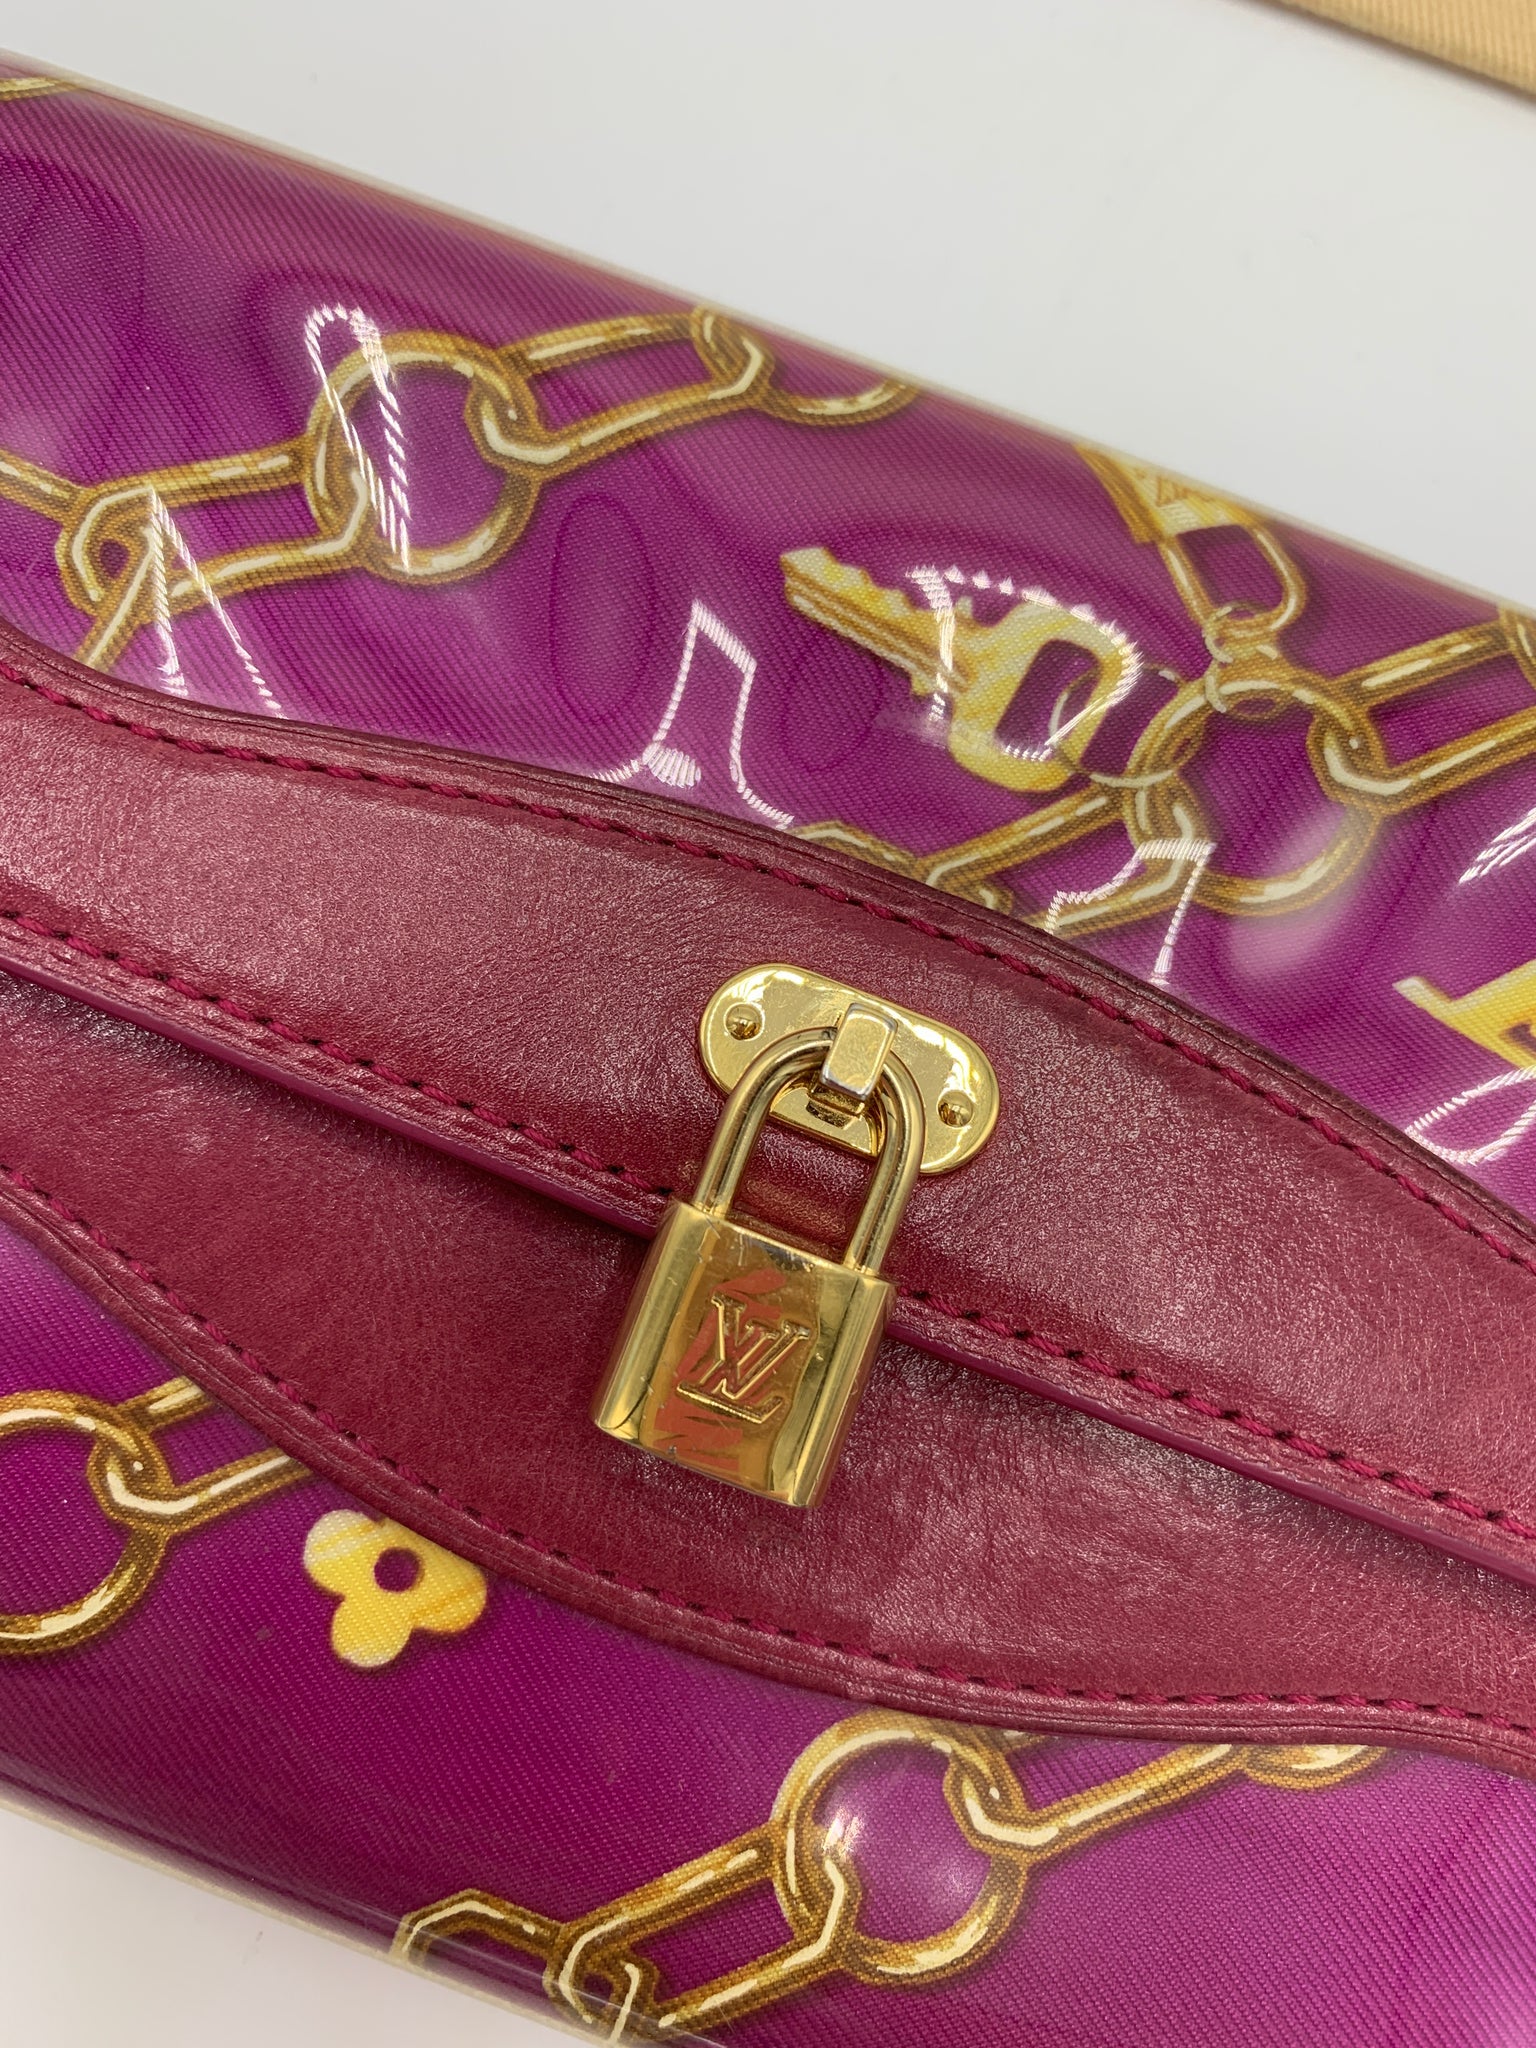 Louis Vuitton Linda Charms Wallet in Fuschia from the Spring/Summer 20 –  Dyva's Closet